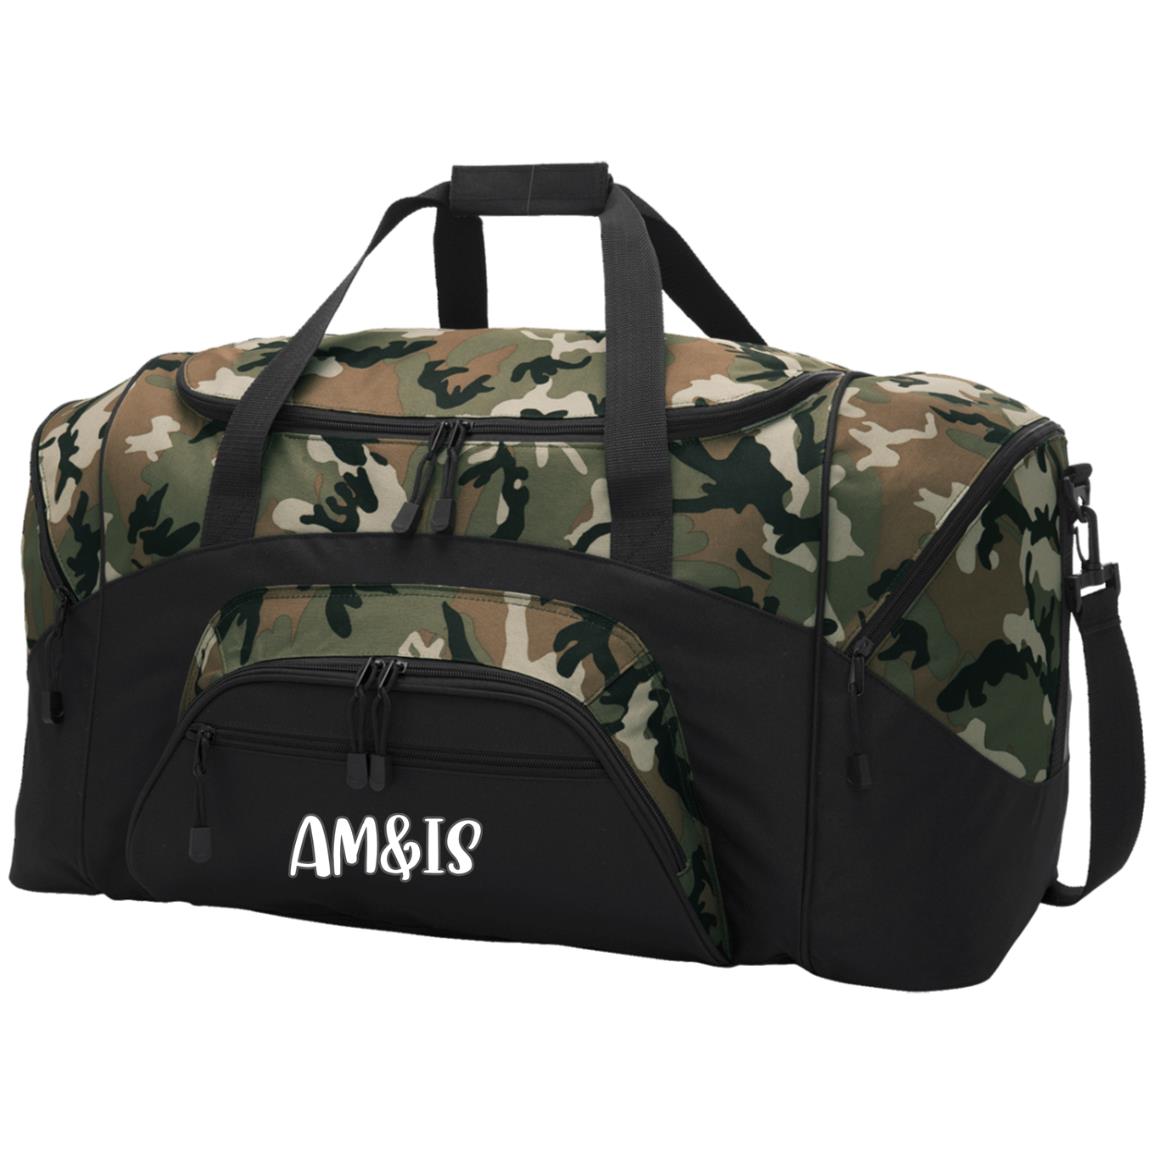 BLACK/CAMOUFLAGE ONE SIZE AM&IS Activewear Colorblock Sport Duffel - duffel bag at TFC&H Co.